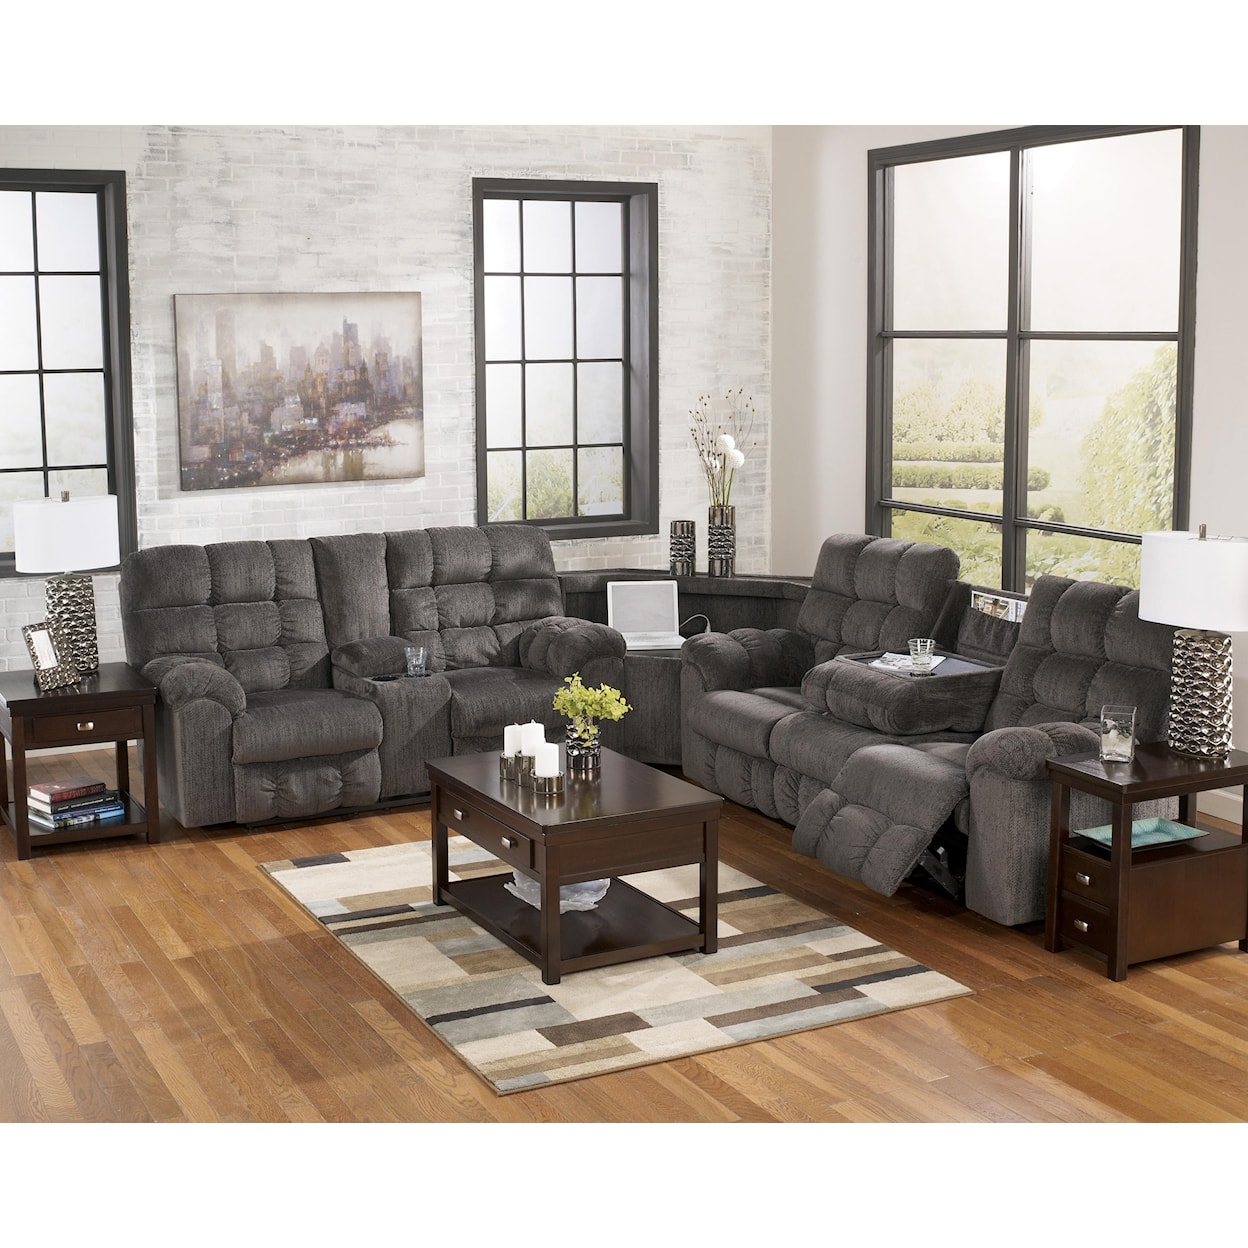 Signature Design by Ashley Furniture Acieona Reclining Sectional with Left Side Loveseat